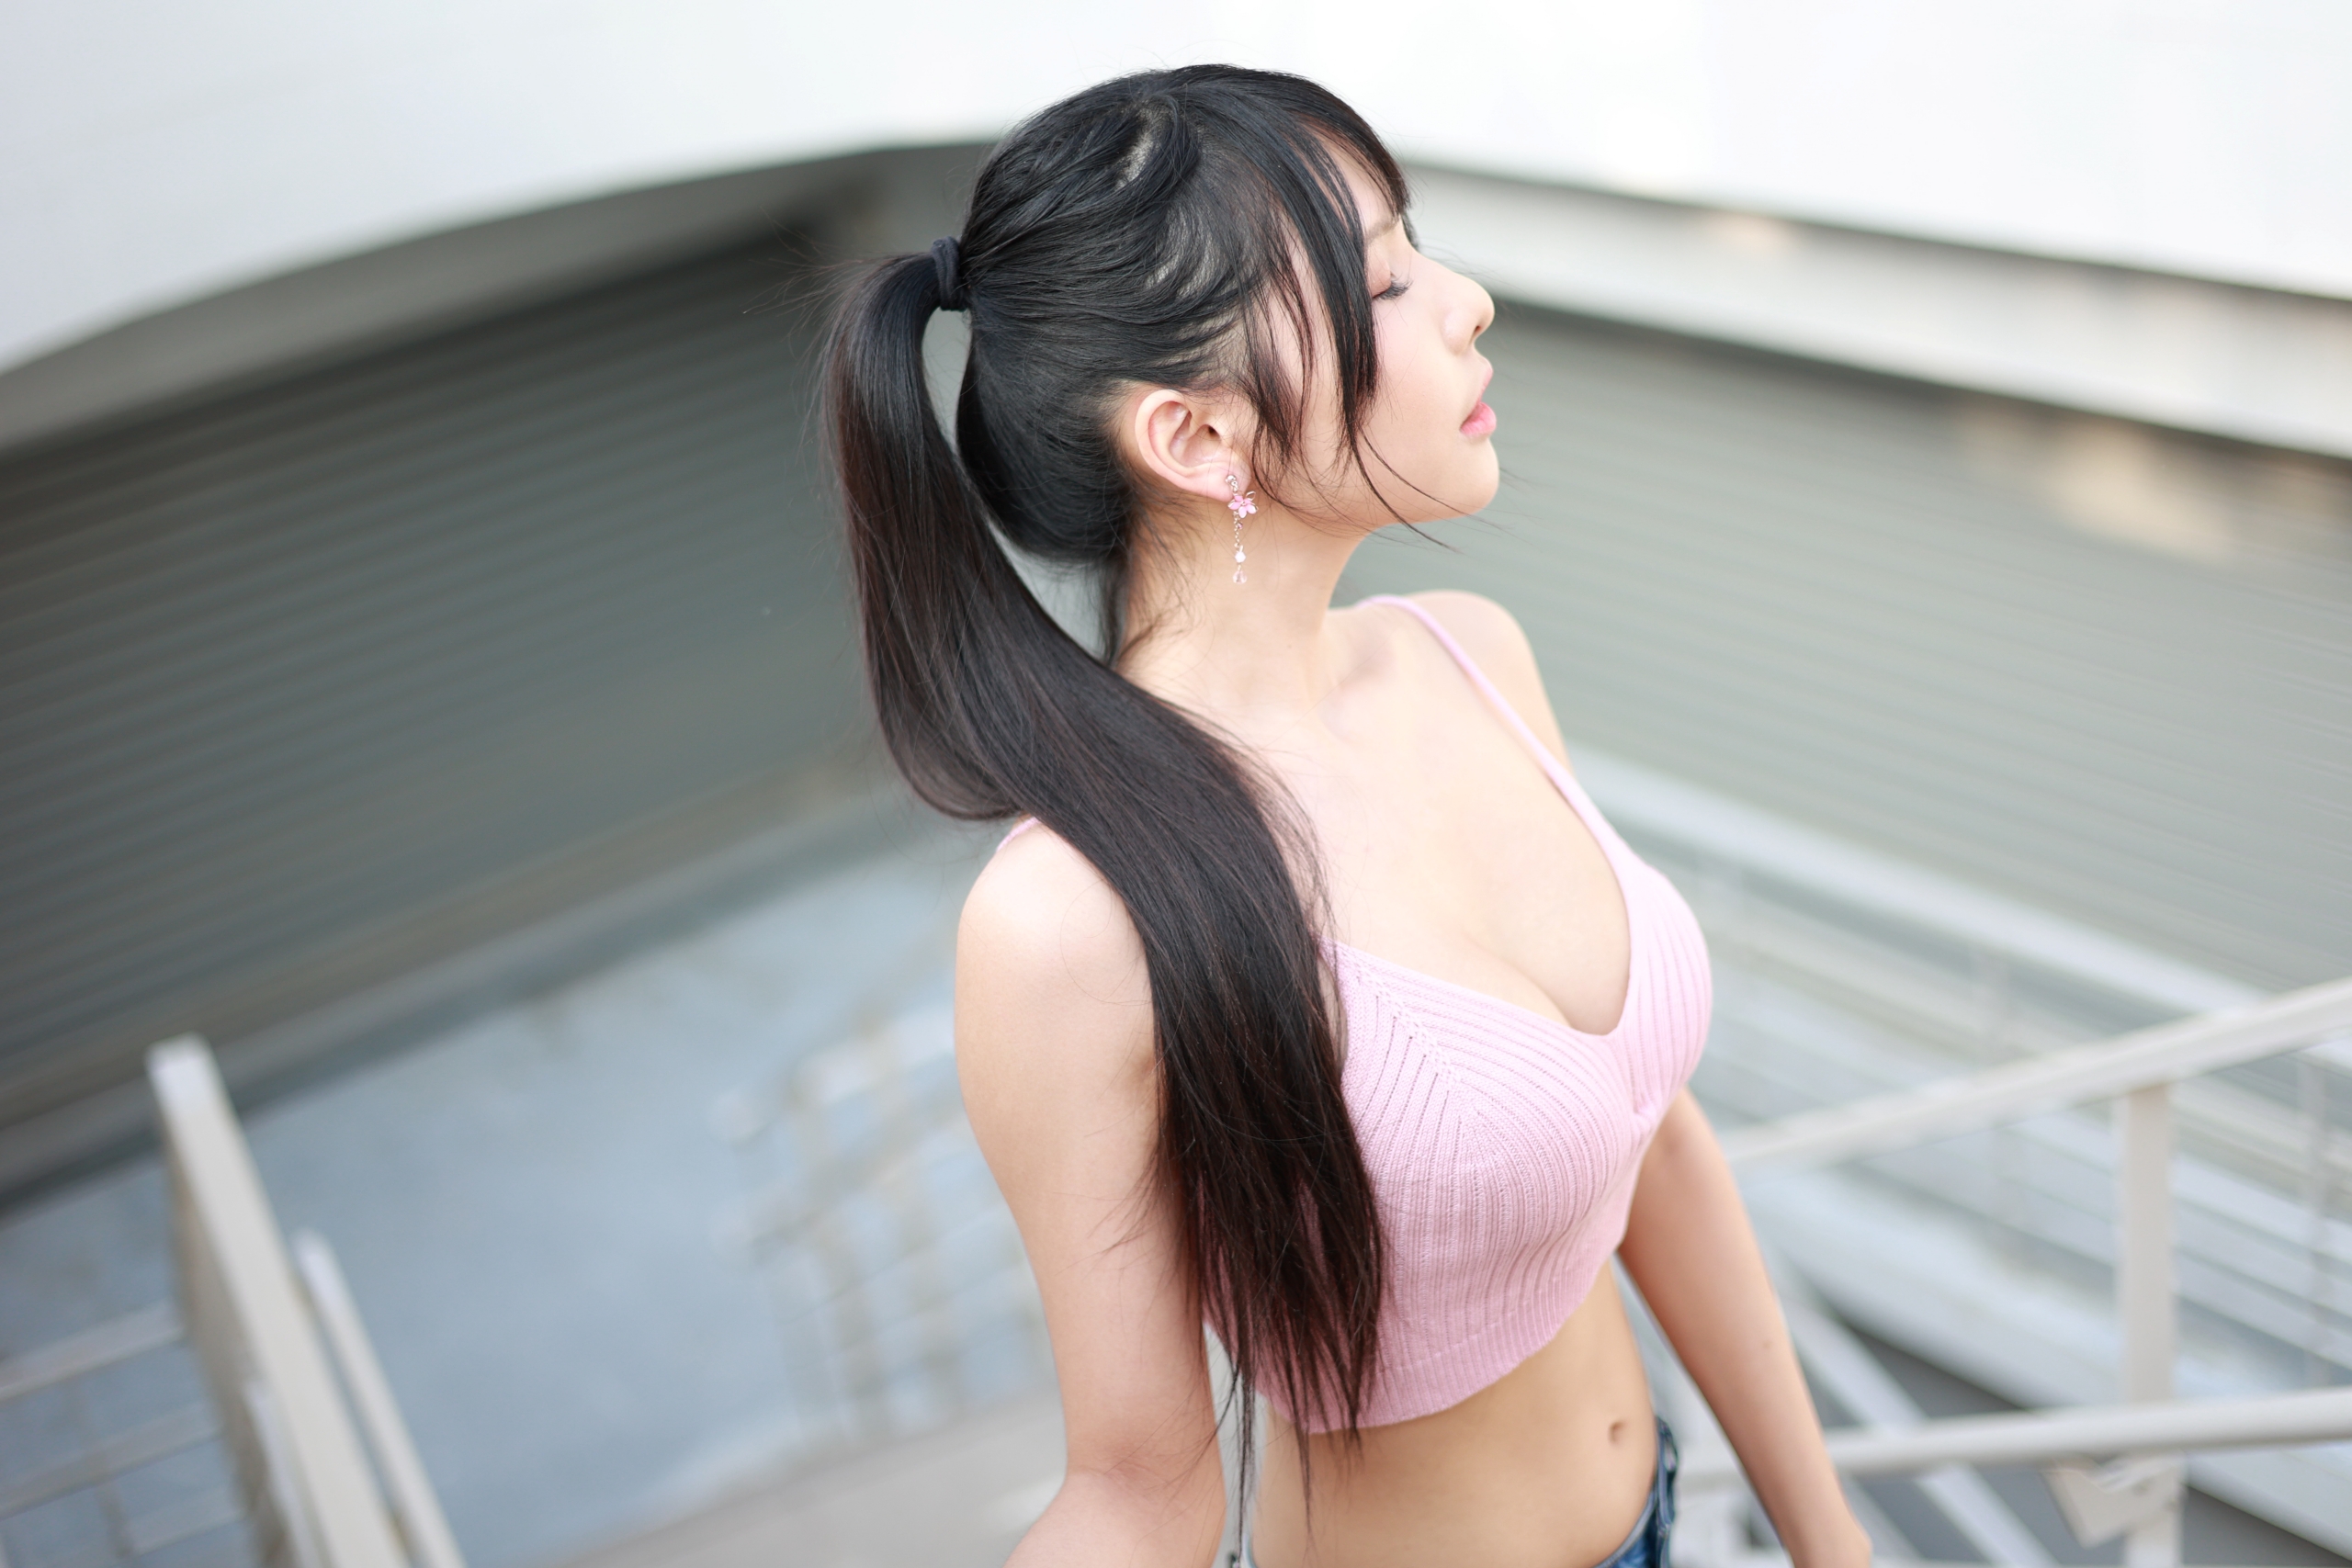 Vicky Women Model Brunette Asian Ponytail Bangs Closed Eyes Parted Lips Earring Pink Tops Portrait O 2560x1707